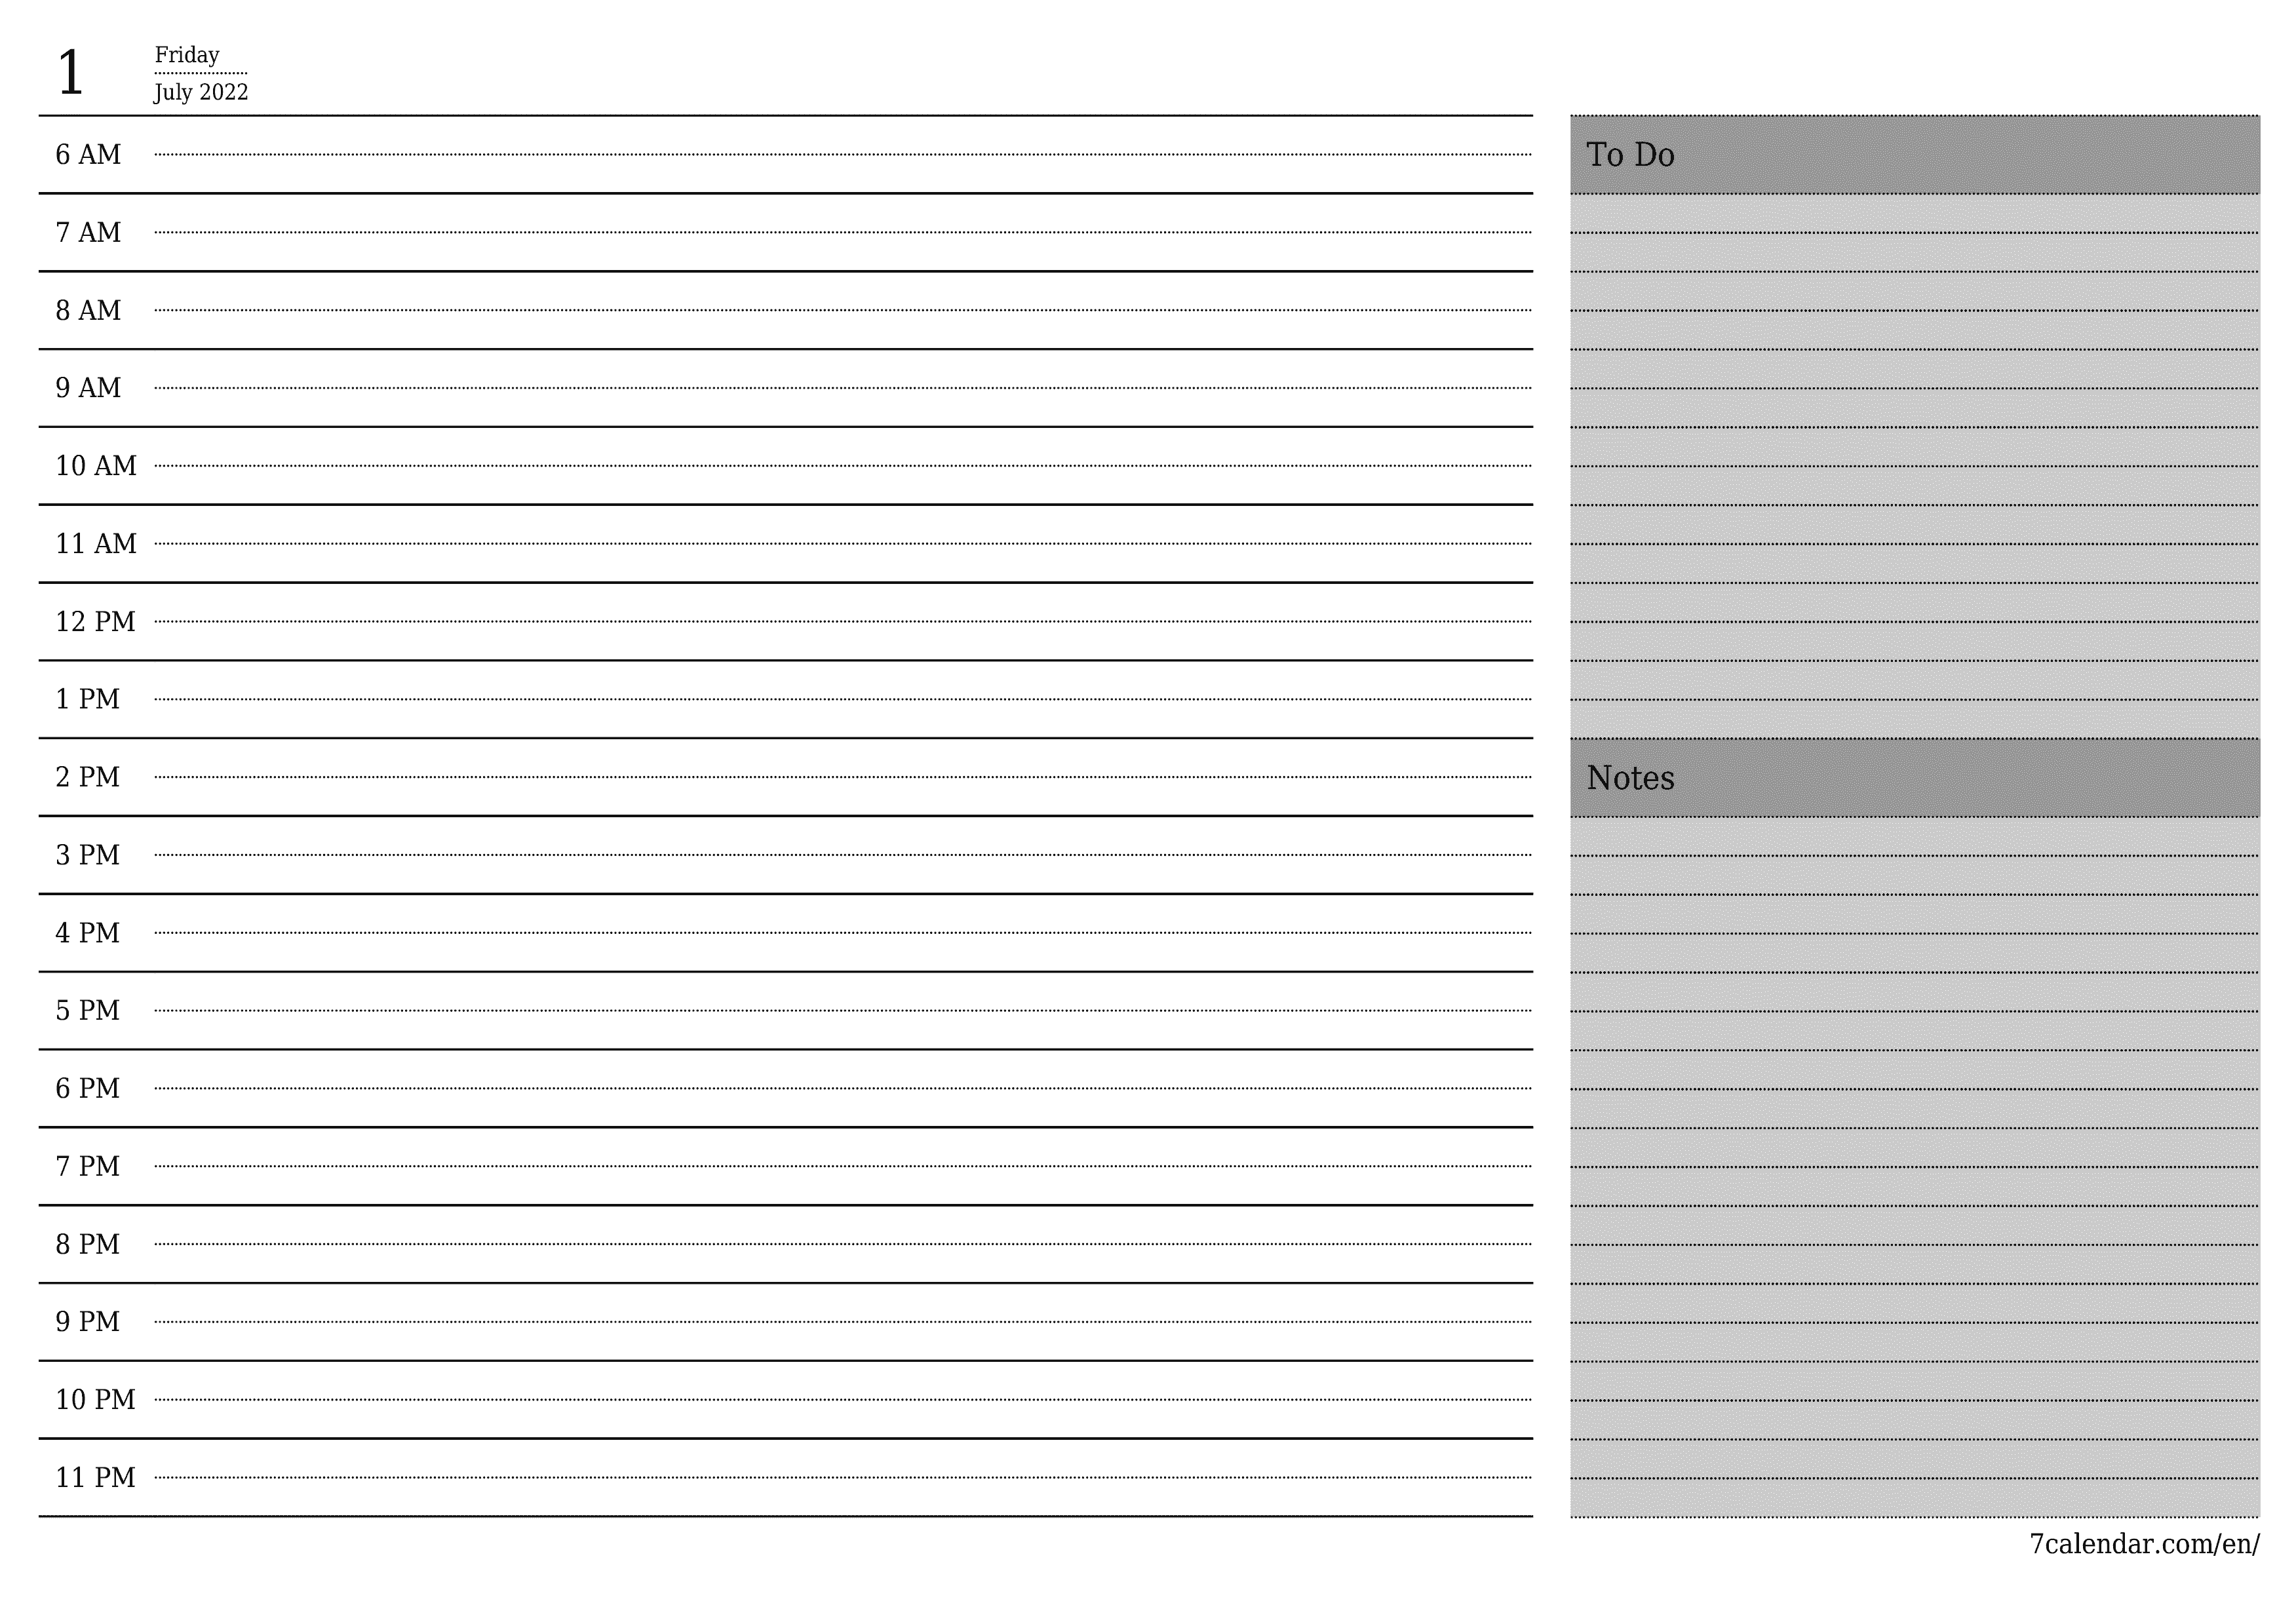 Blank daily printable calendar and planner for day July 2022 with notes, save and print to PDF PNG English - 7calendar.com